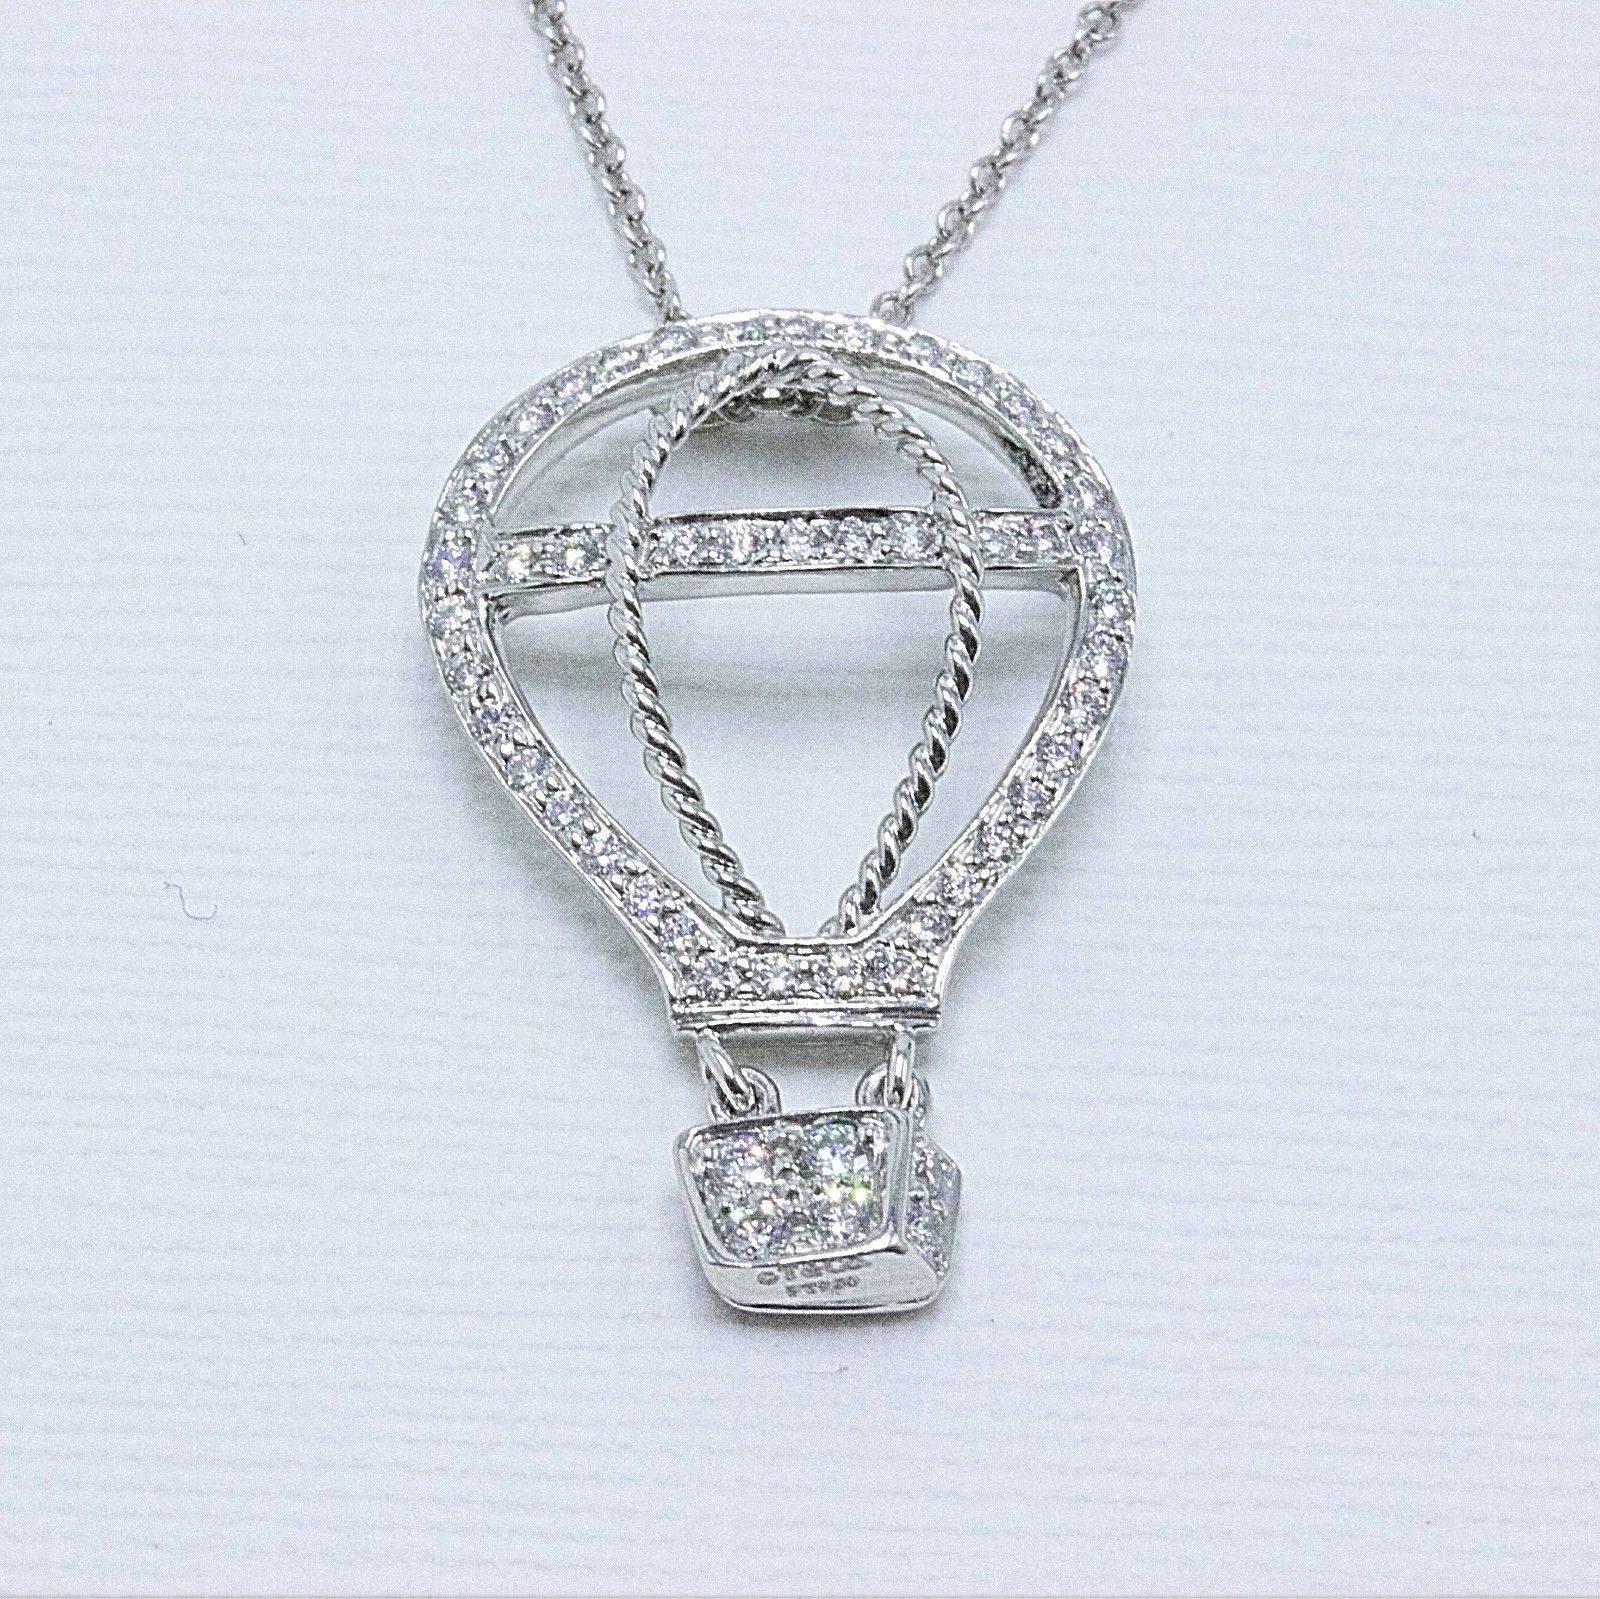 Tiffany & Co.
Style:  Diamond Hot Air Balloon Pendant Necklace
Sku Number:  18411972
Metal:  Platinum PT950
Length:  15 Inches Rolo Chain & 1 Inch Pendant
Total Carat Weight:  0.33 TCW
Diamond Shape:  Round Brilliant
Diamond Color & Clarity:  F-G /